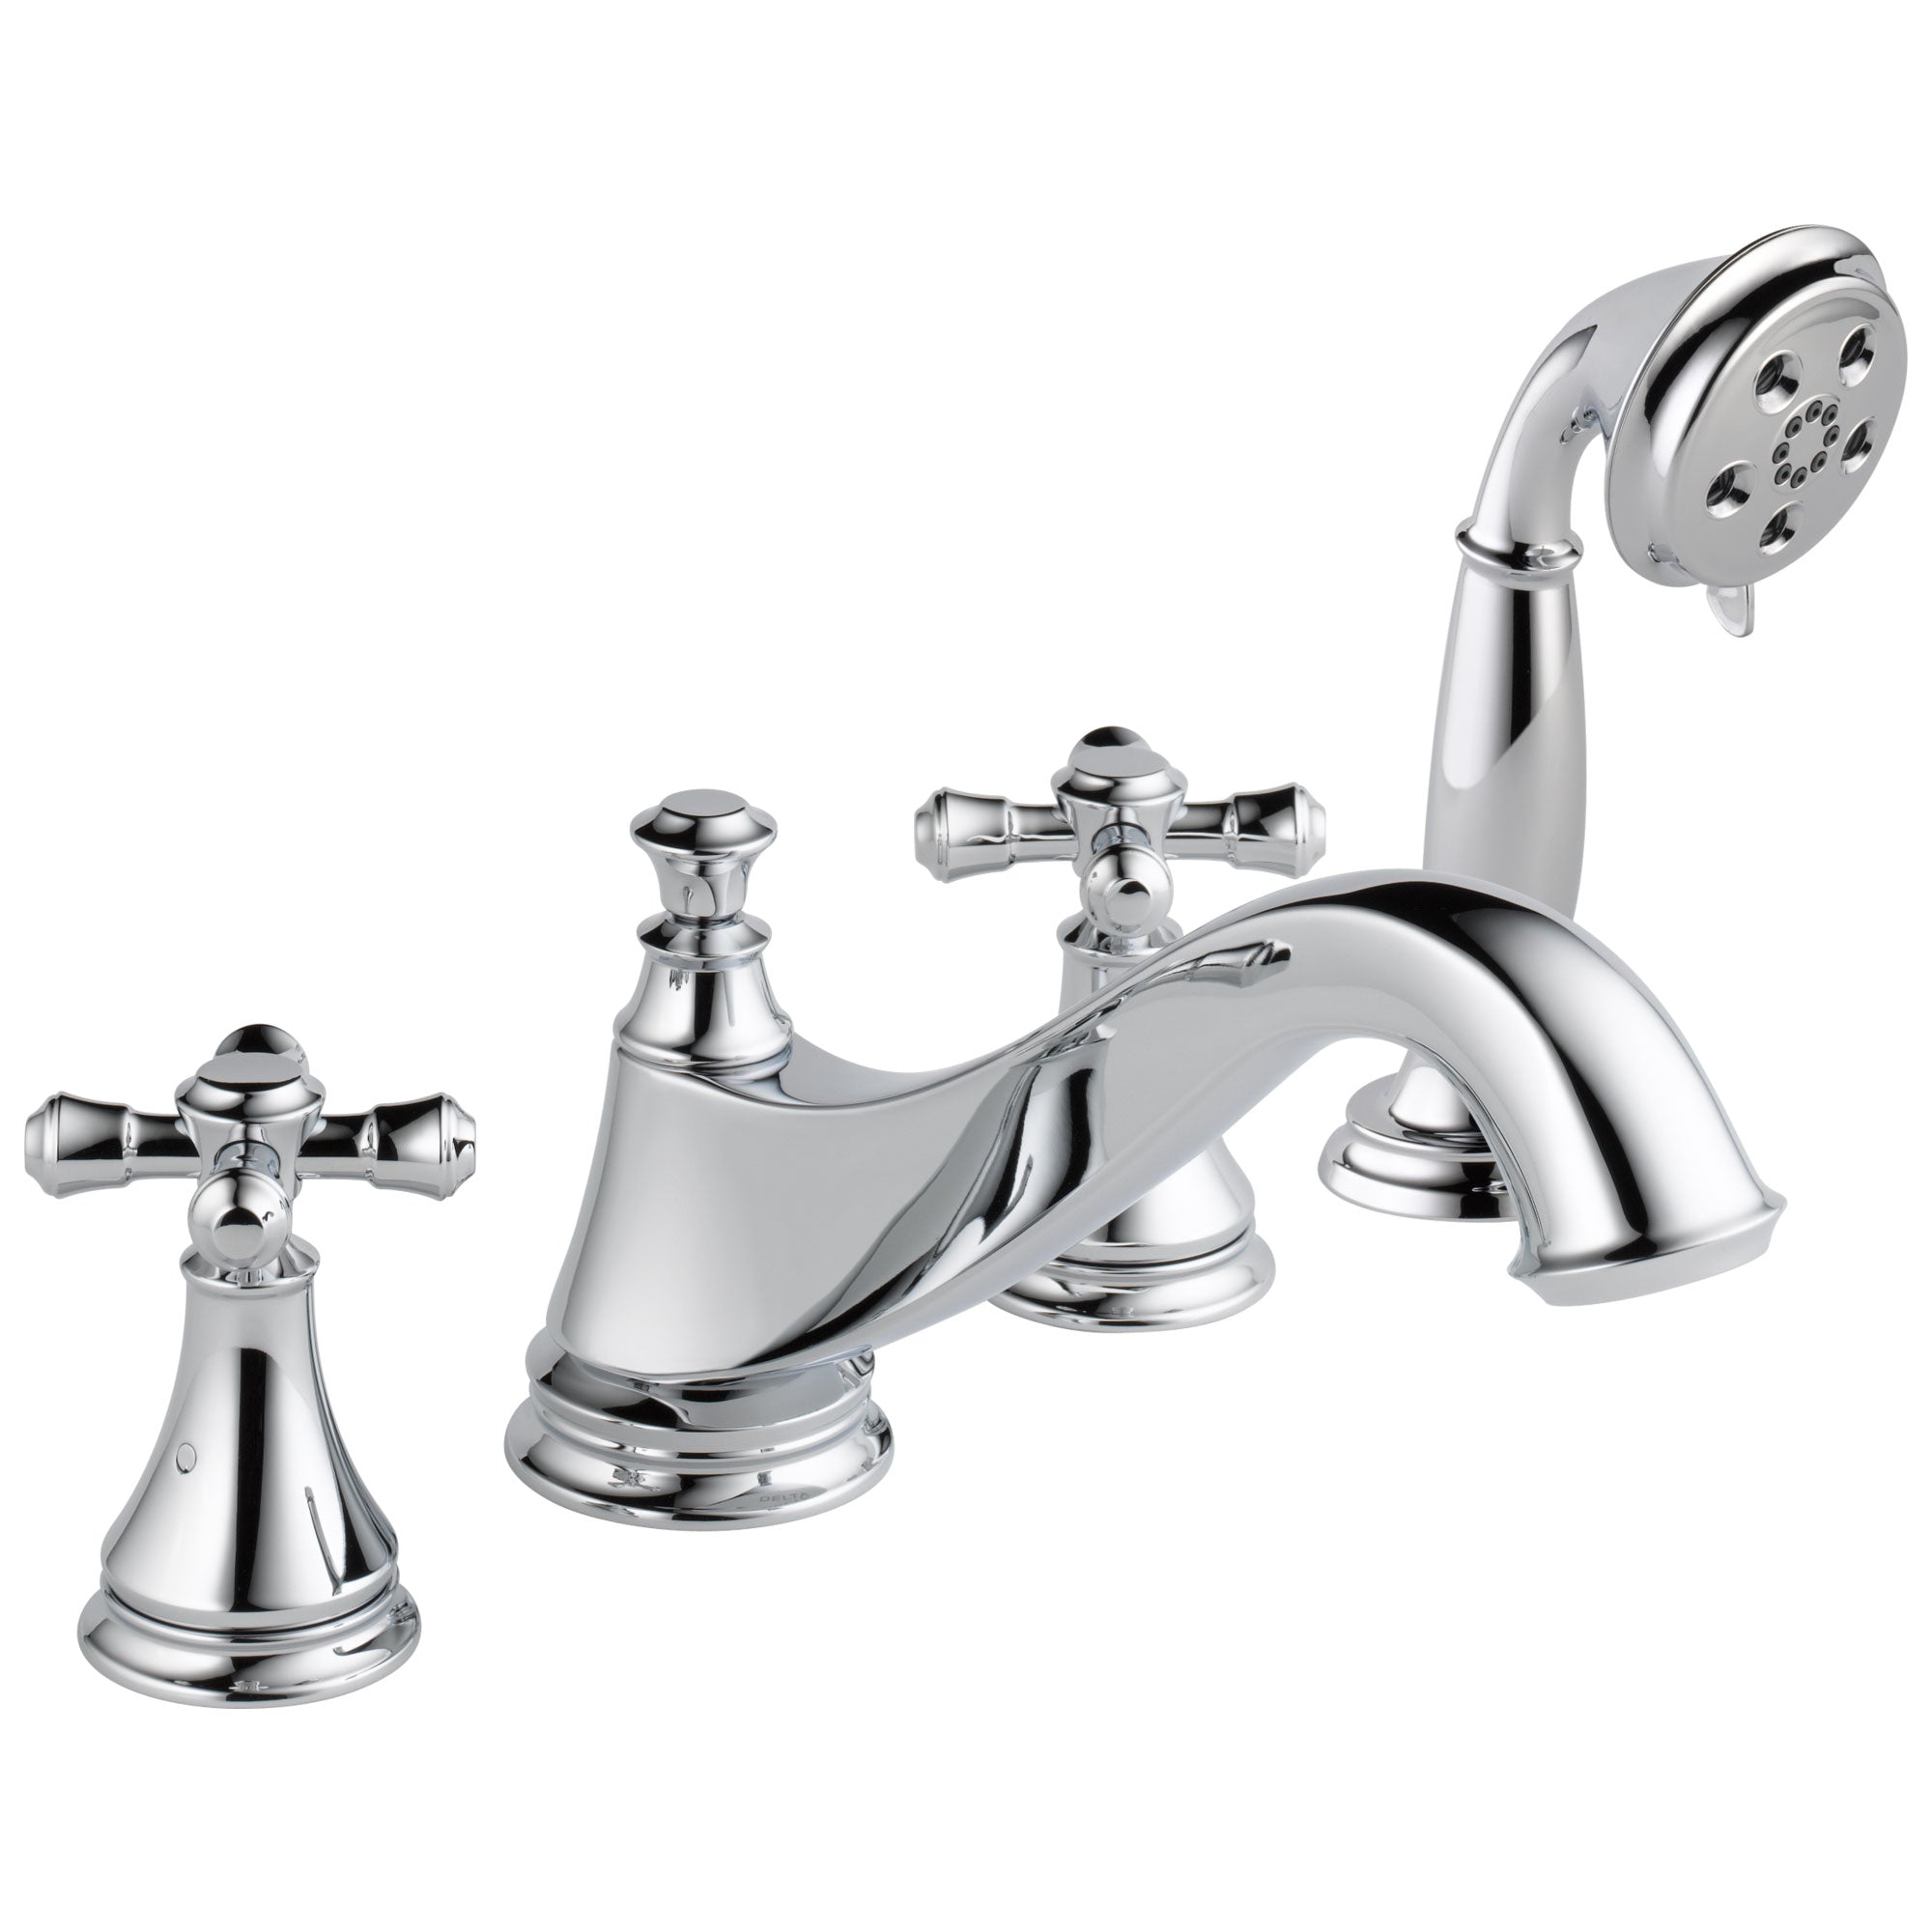 Delta Cassidy Collection Chrome Classic Spout Roman Tub Filler Faucet Trim Kit with Hand Shower INCLUDES (2) Cross Handles and Rough-in Valve D1415V